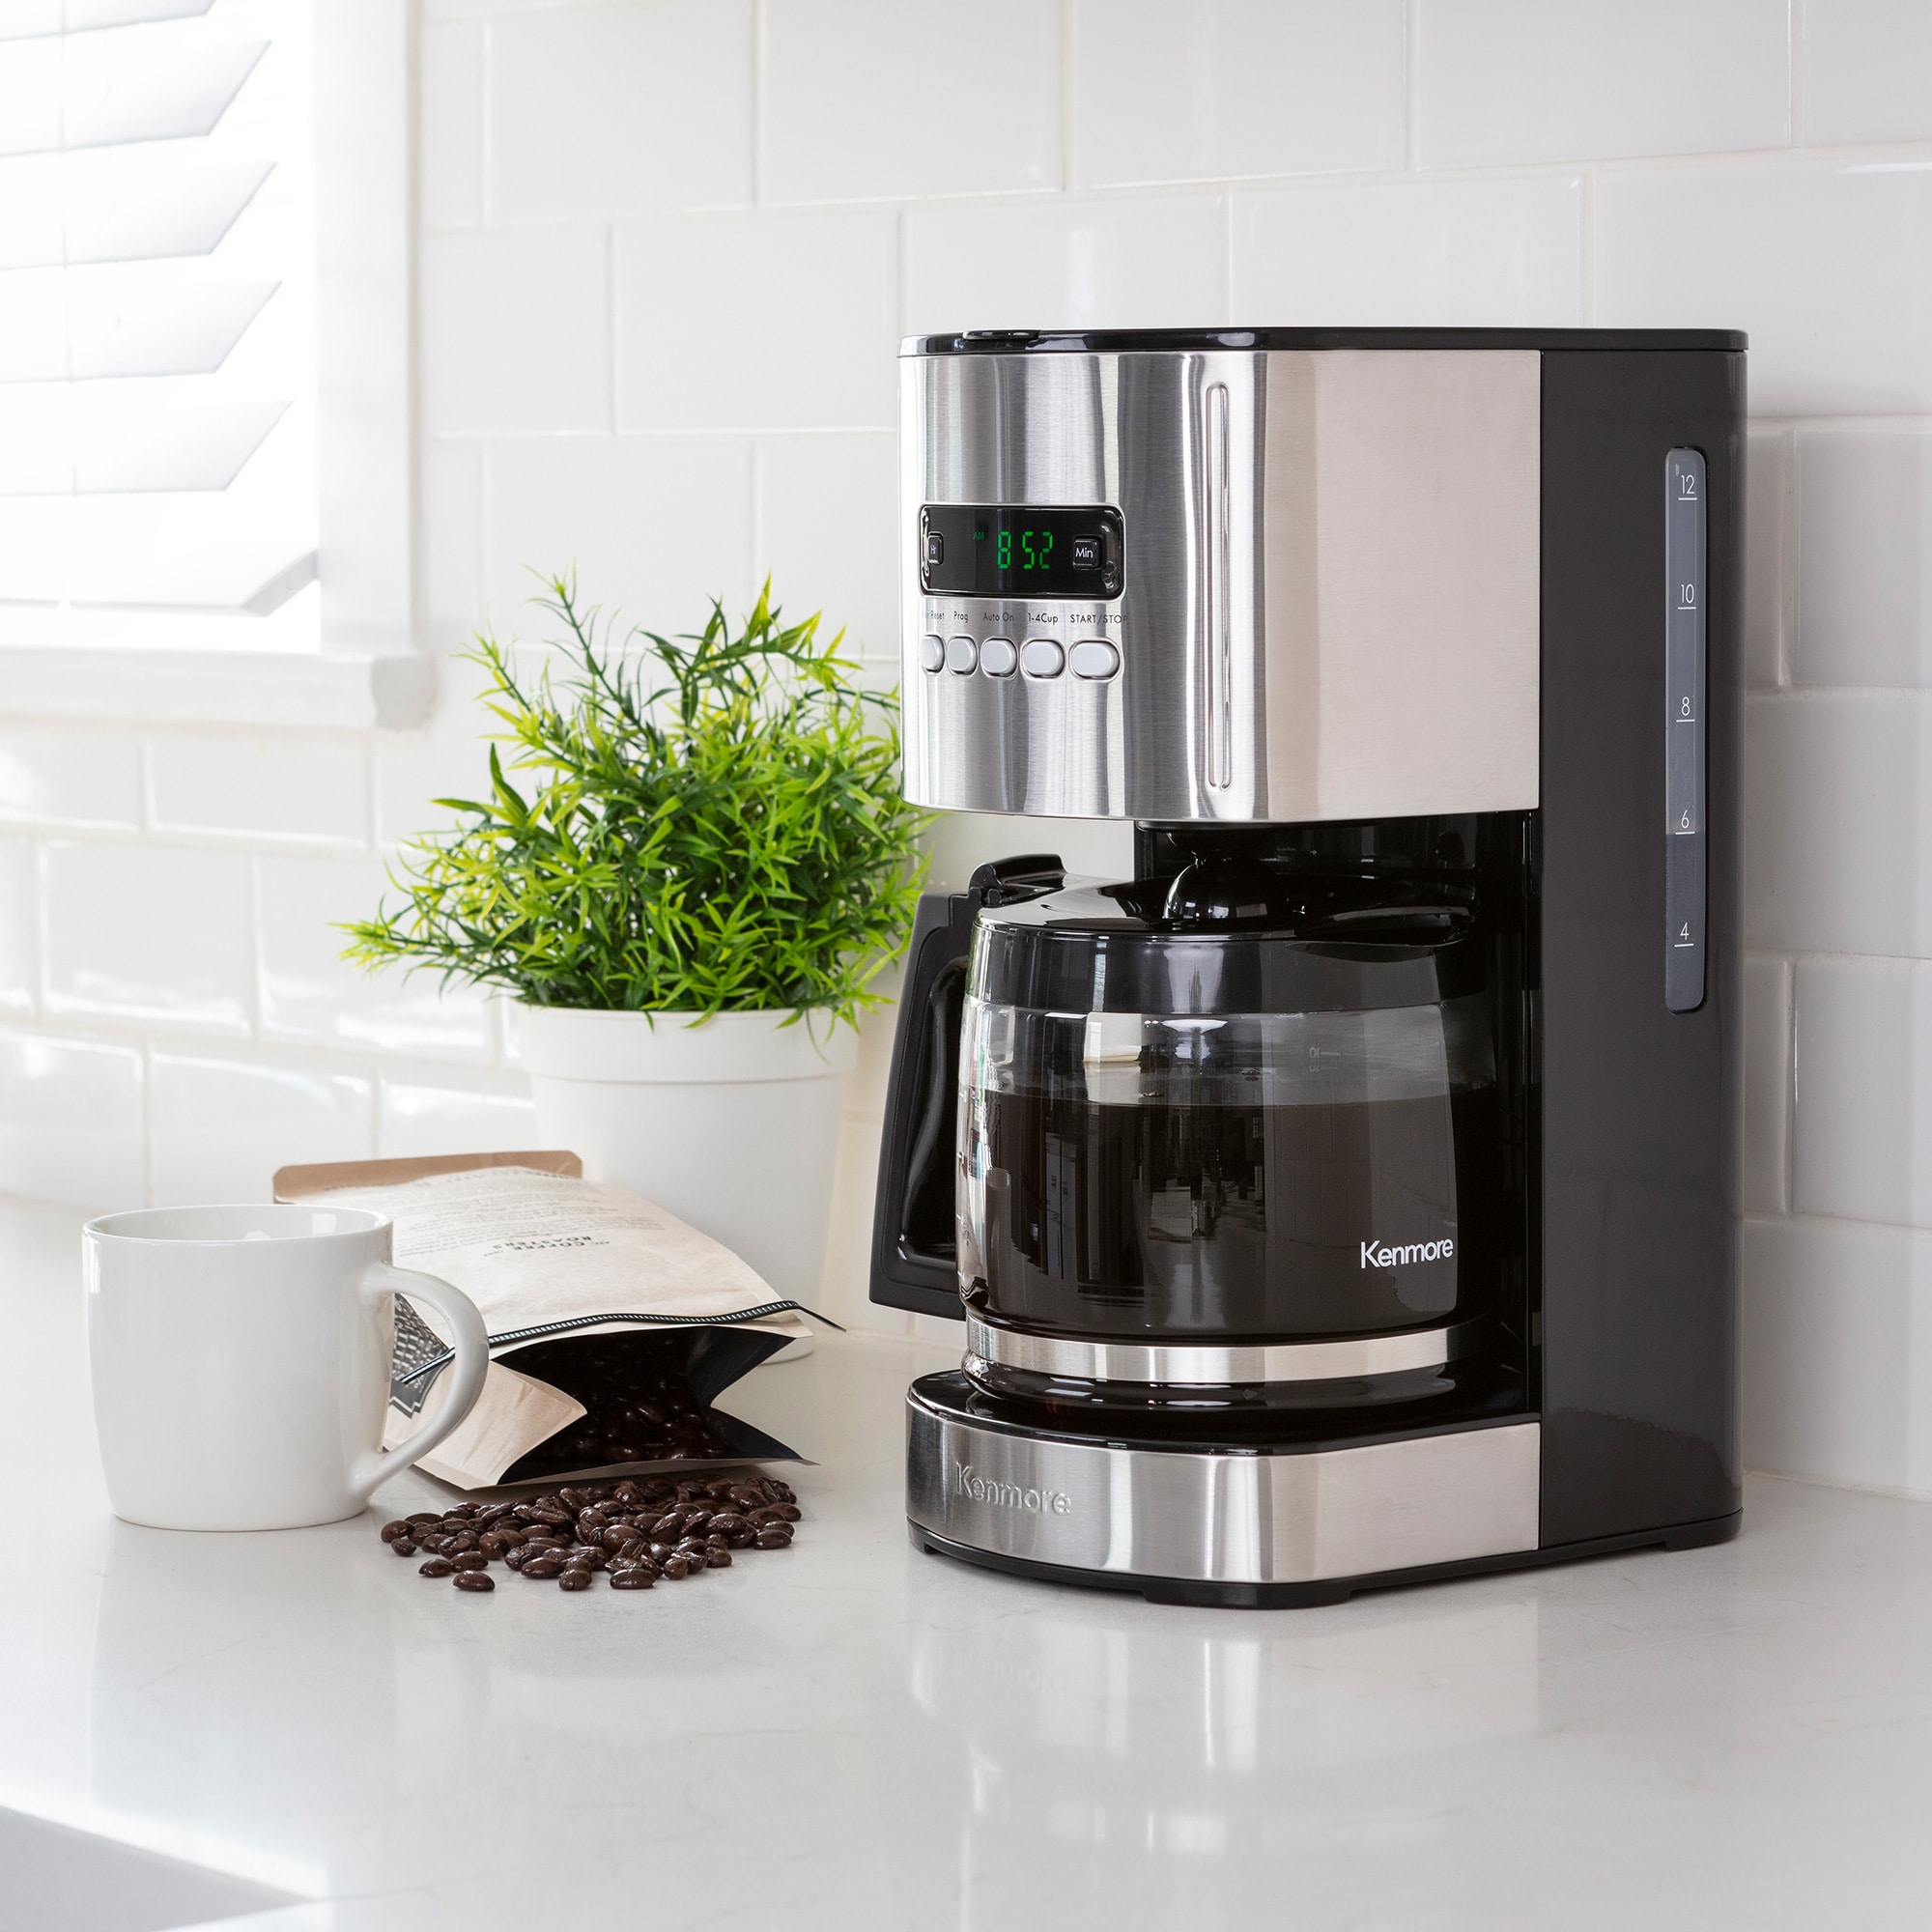 Removable Water Tank Coffee Makers at